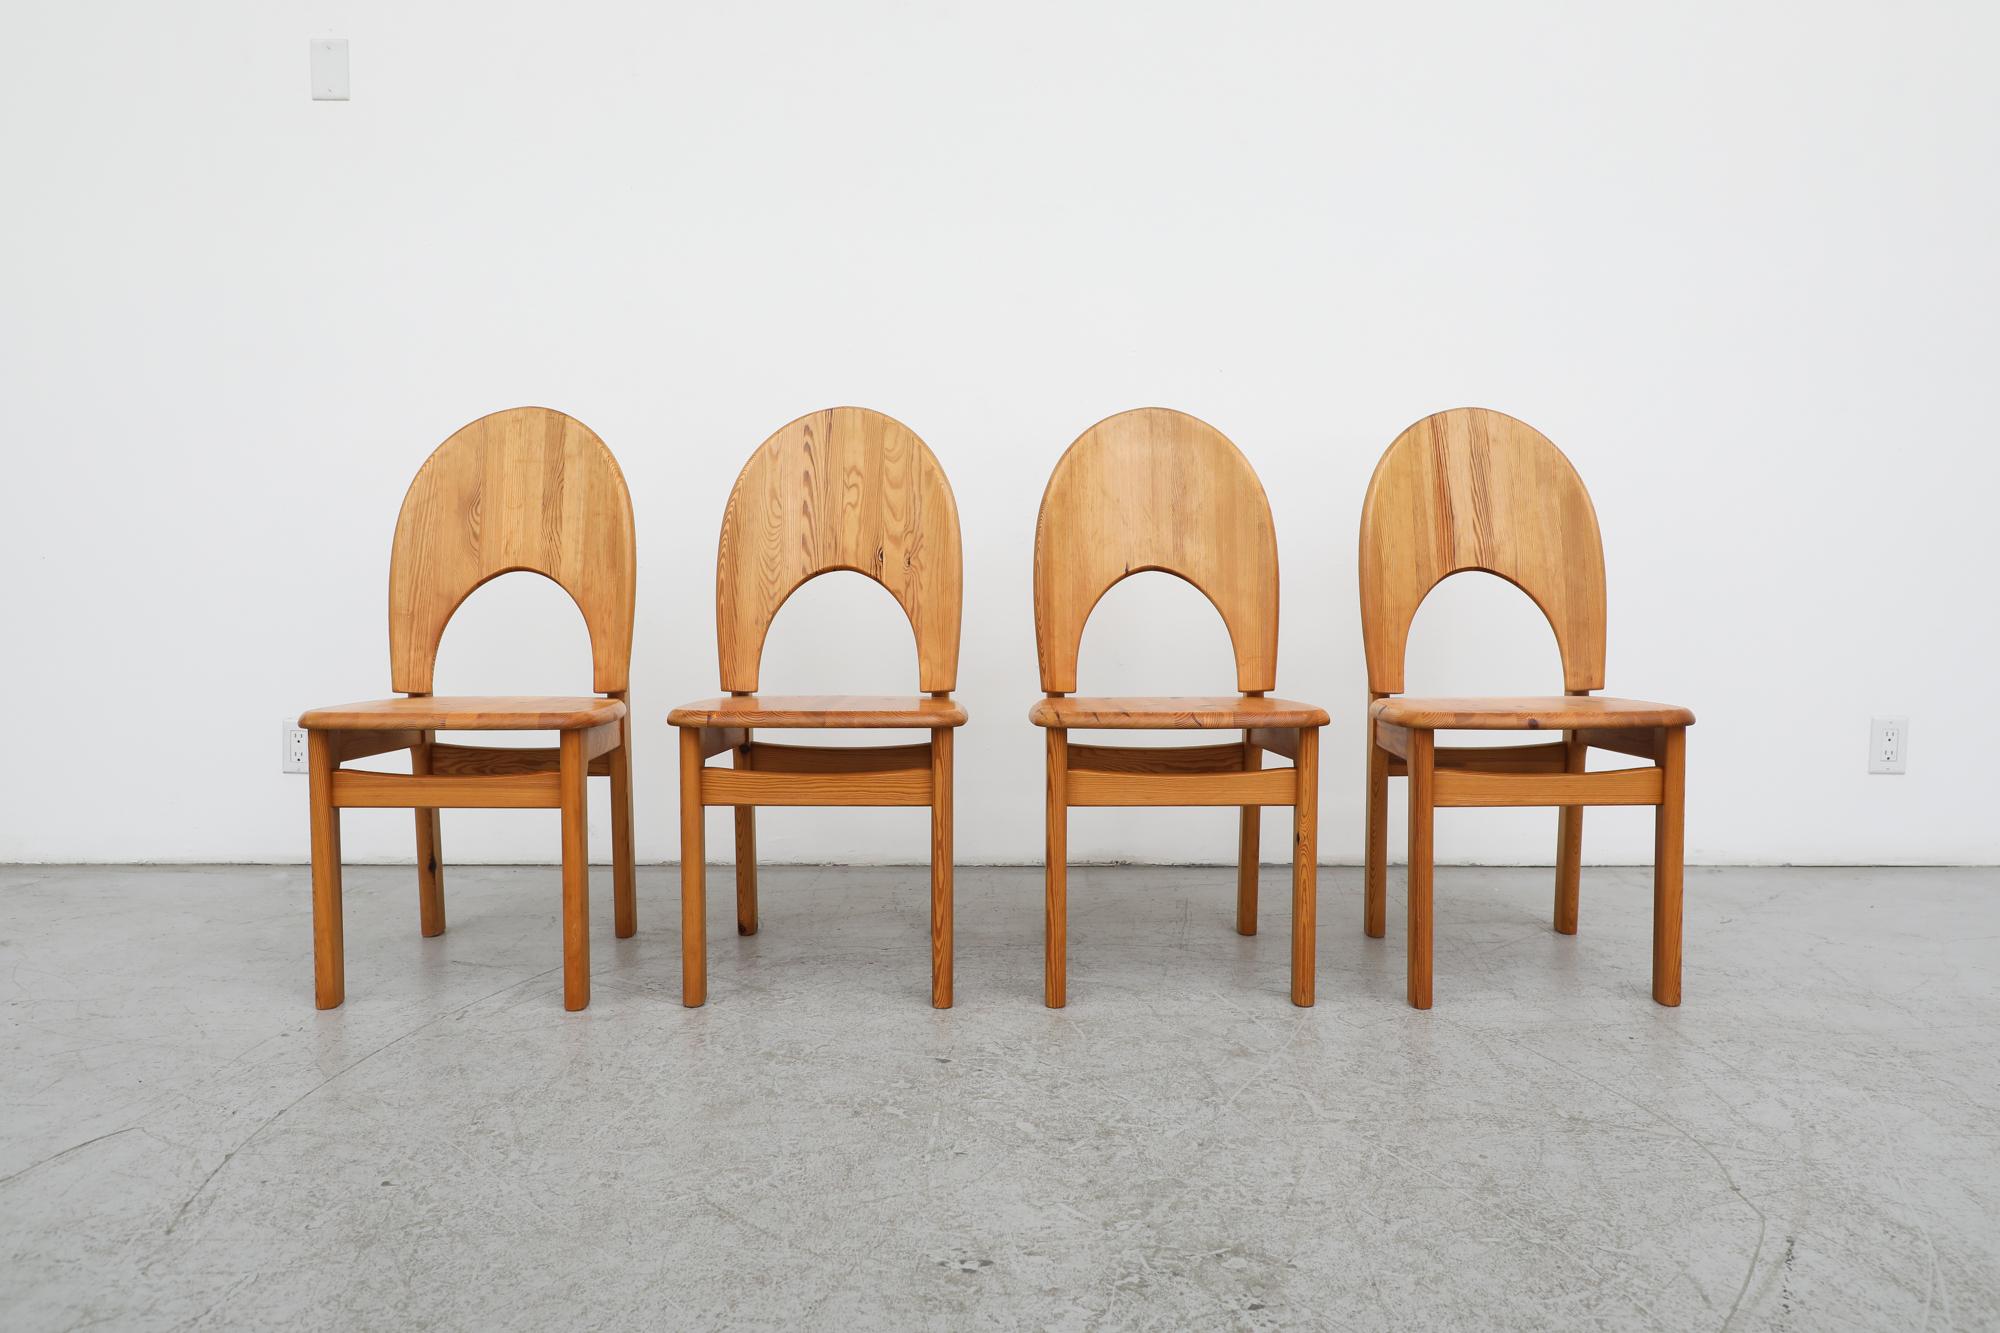 Beautiful Mid-Century set of 4 Rainer Daumiller designed plyafully curved pine dining chairs for Danish post-war furniture manufacturer Hirtshals Savvaerk. The chairs have an attractive wood grain that is accentuated by the elegant curves and their